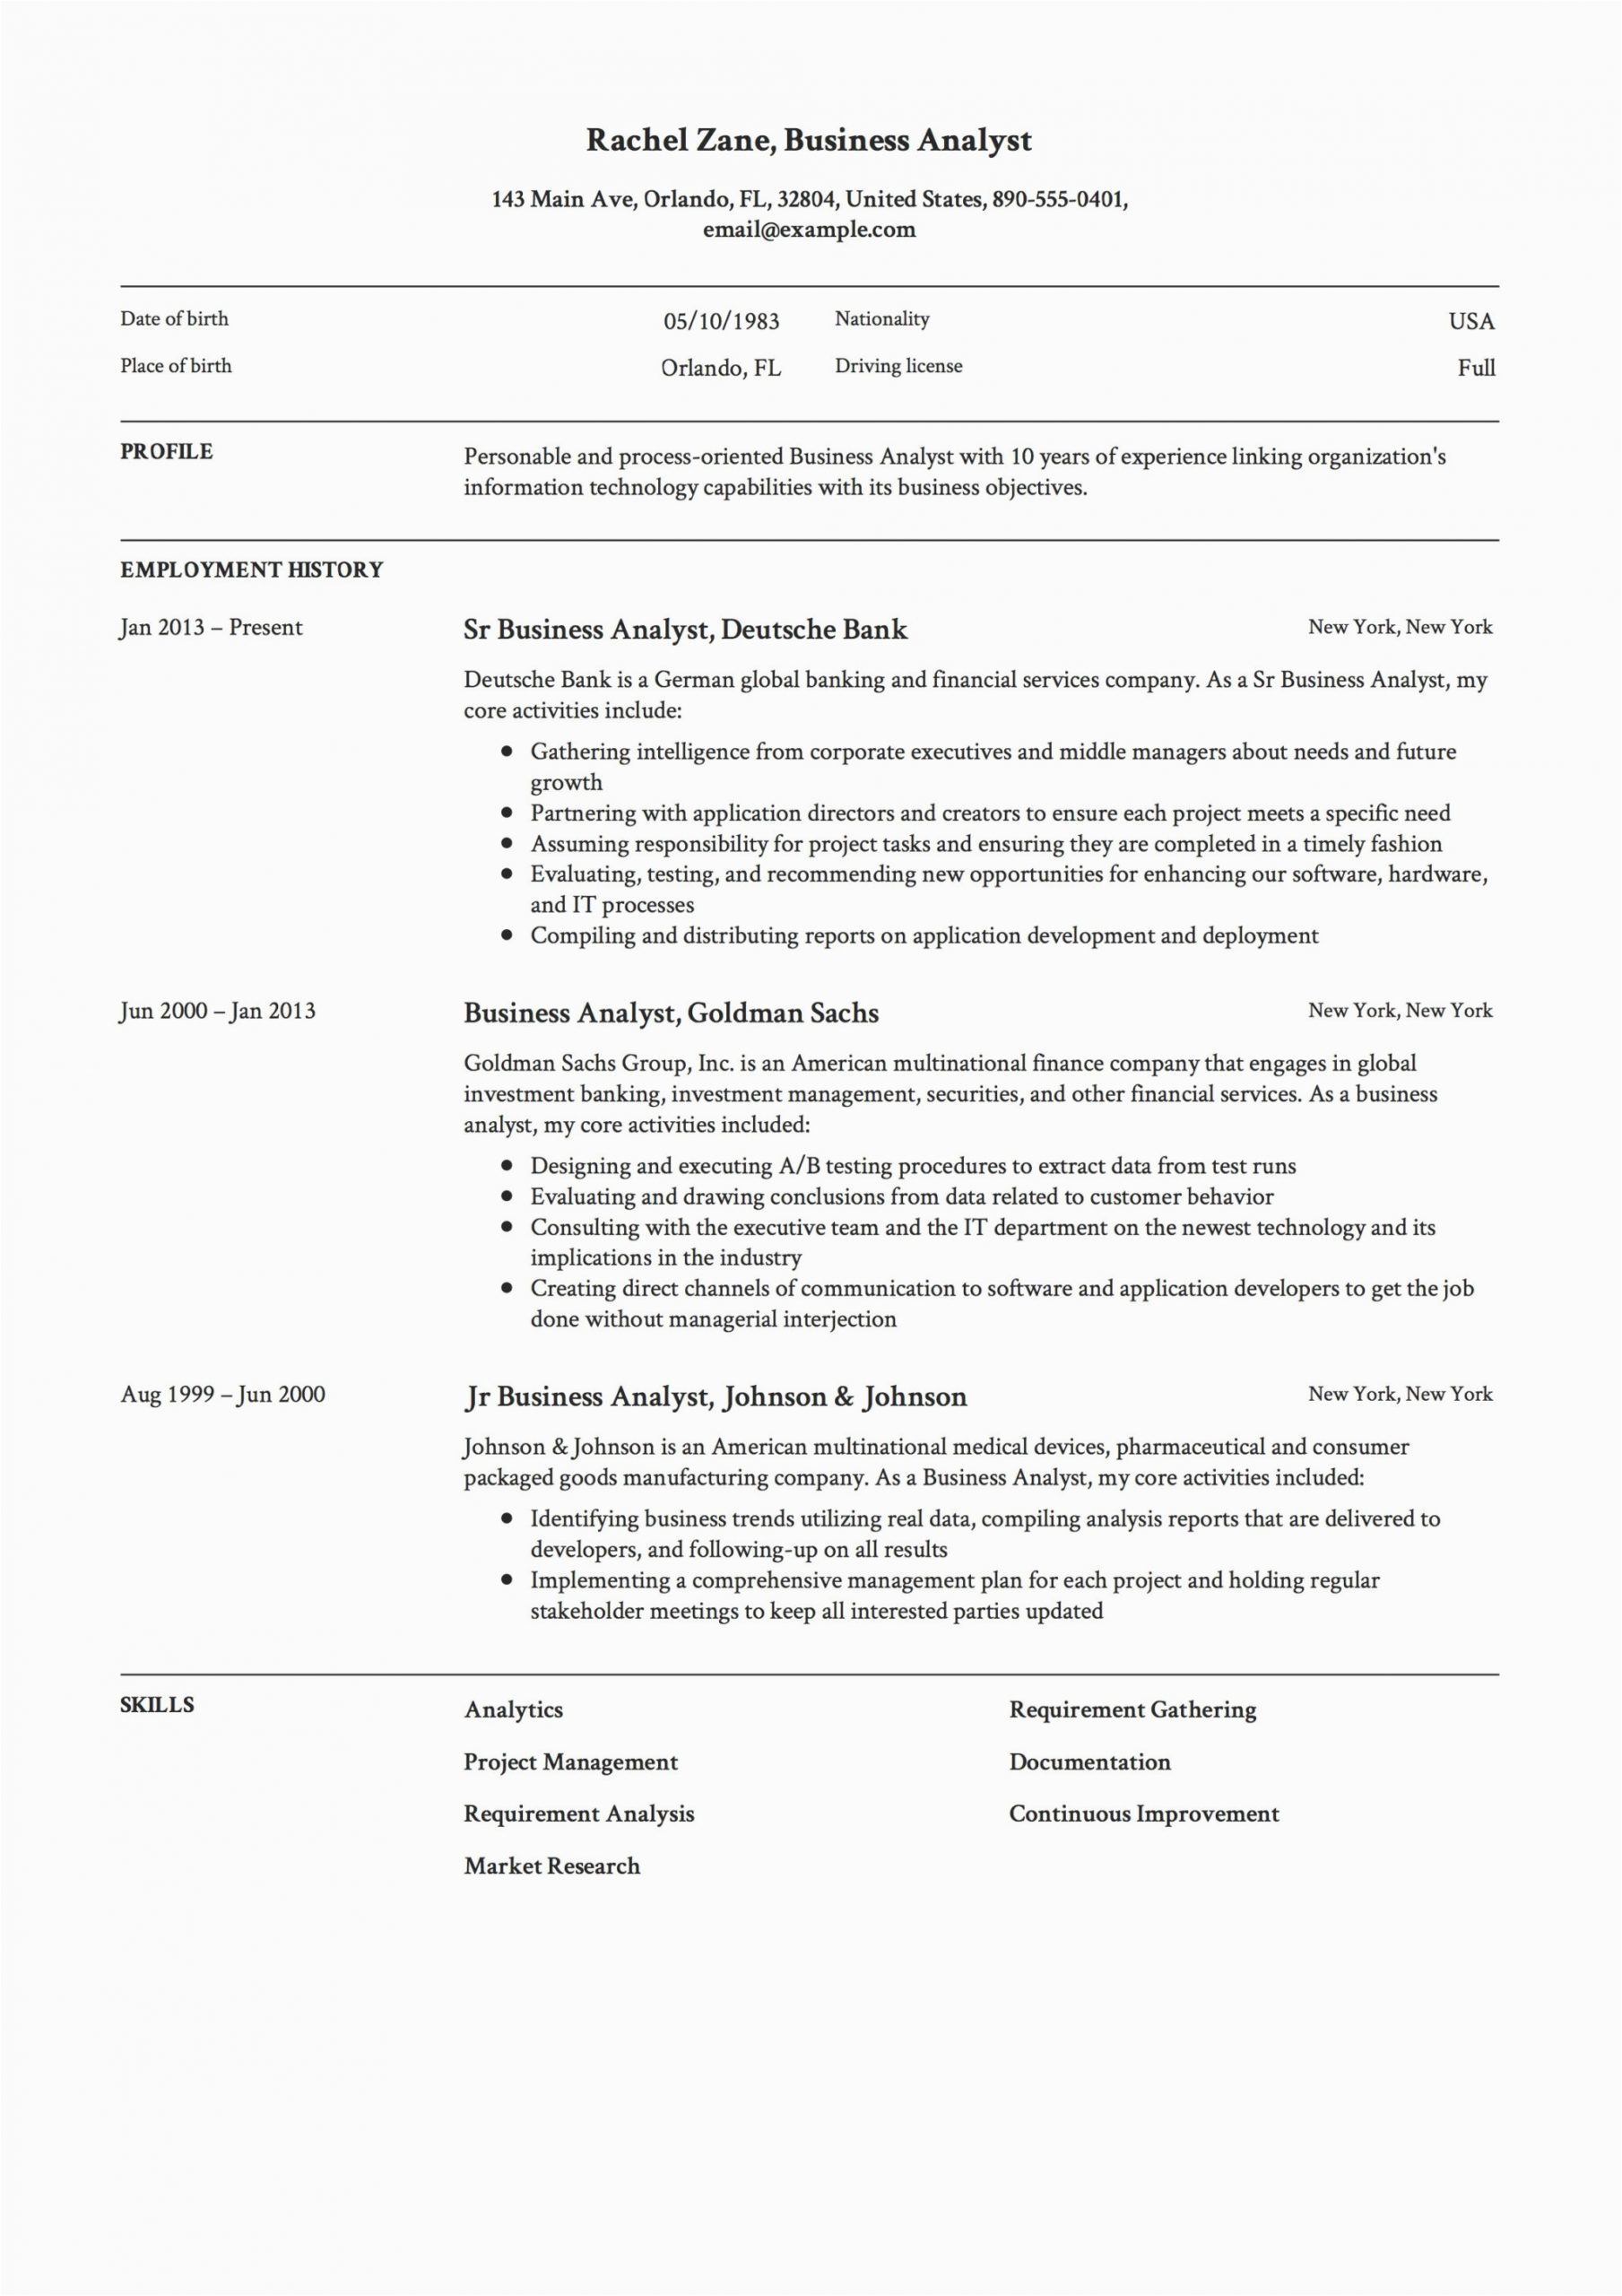 Sample Resume for Experienced Business Analyst Business Analyst Resume & Guide 12 Templates